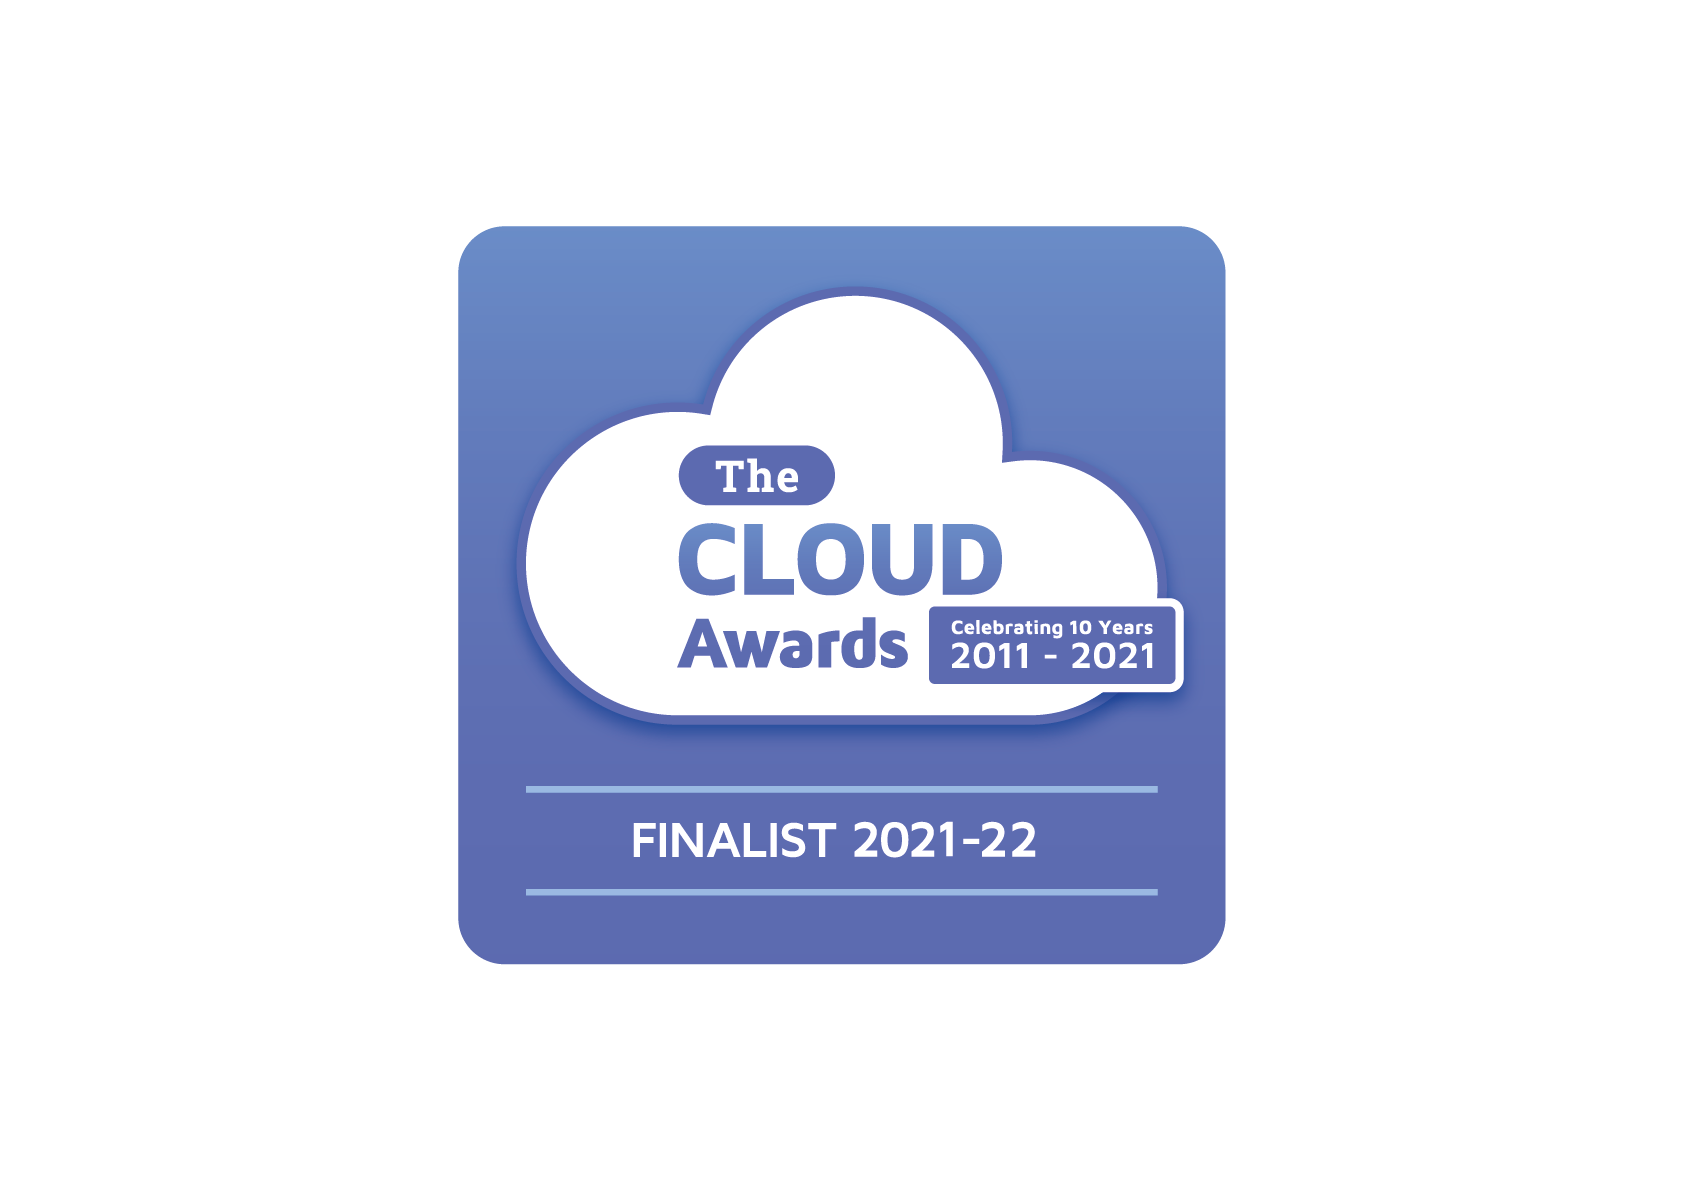 The 2021-22 The Cloud Awards